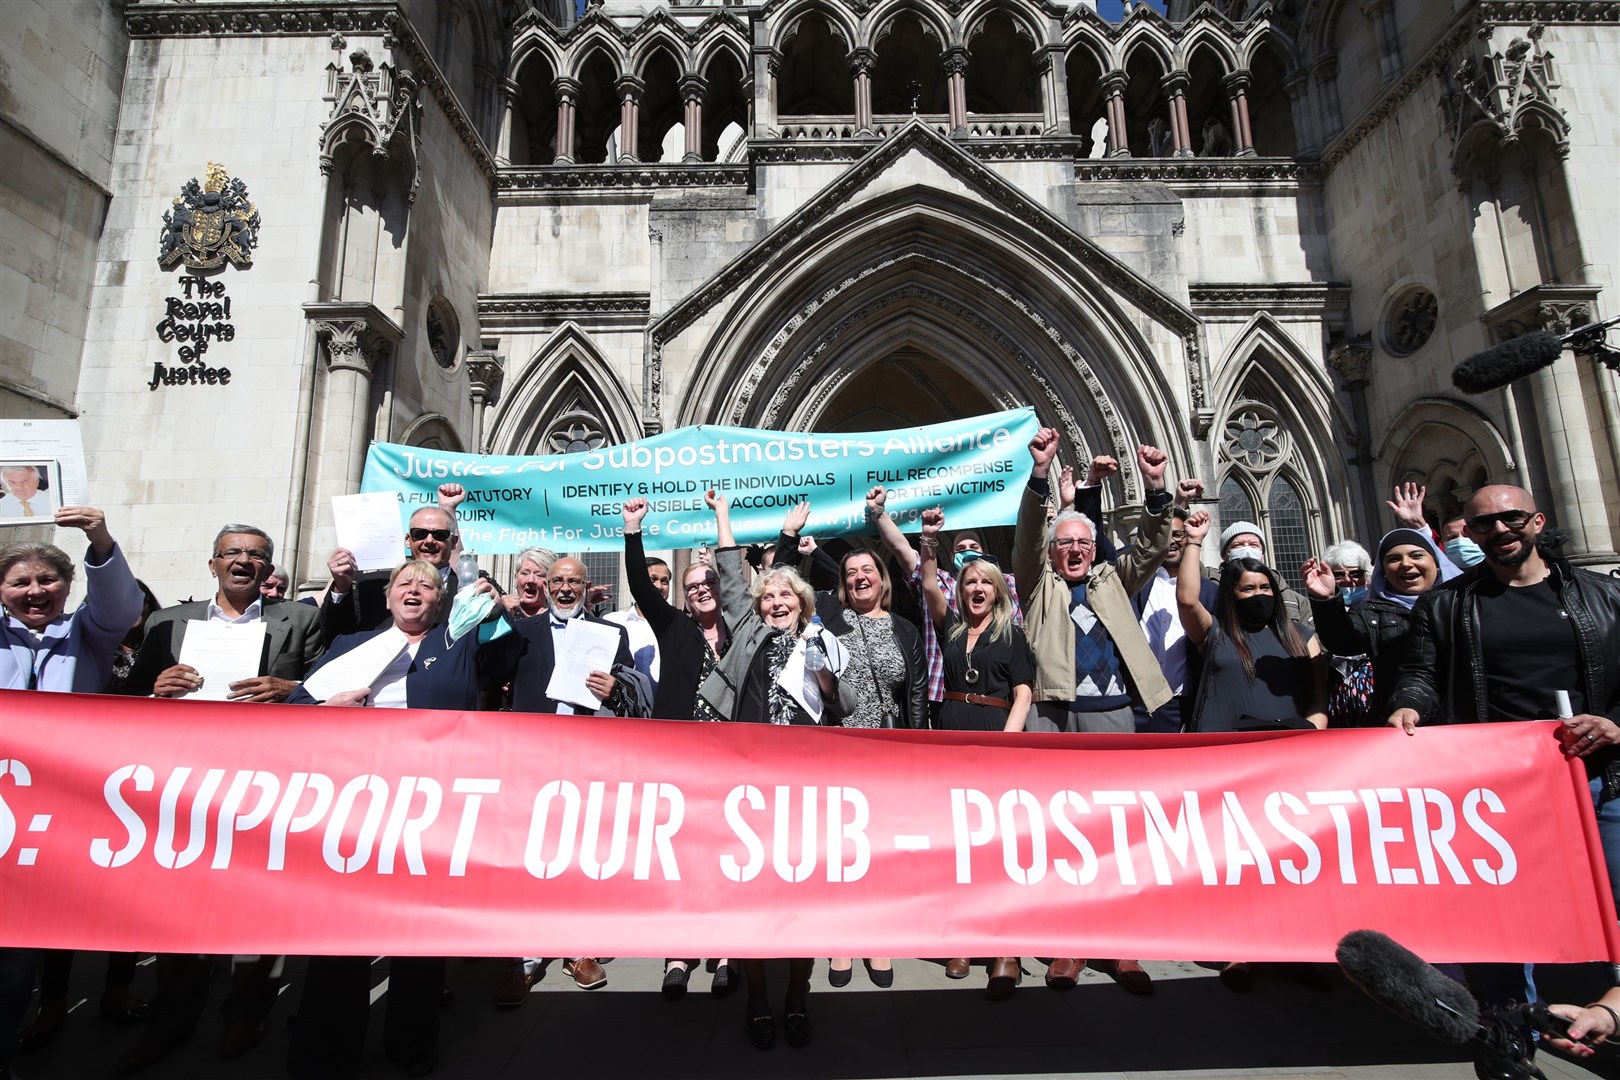 Former post office workers celebrate outside the Royal Courts of Justice, London, after having their convictions overturned by the Court of Appeal (Yui Mok/PA)